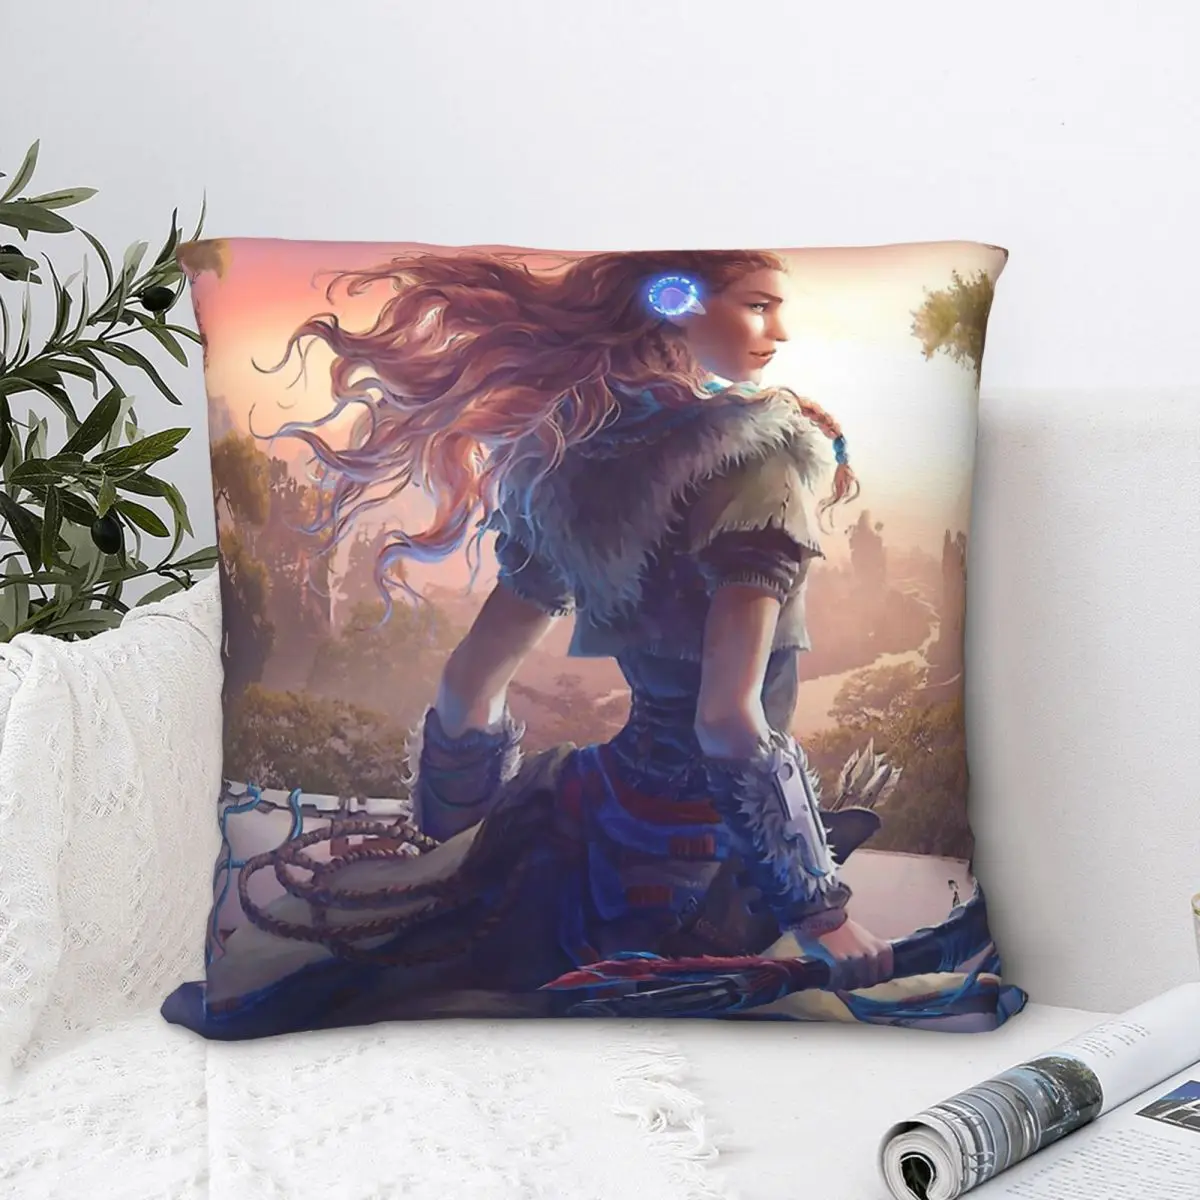 

Aloy Horizon Zero Dawn Hug Pillowcase Backpack Cojines Home DIY Printed Office Coussin Covers Decorative